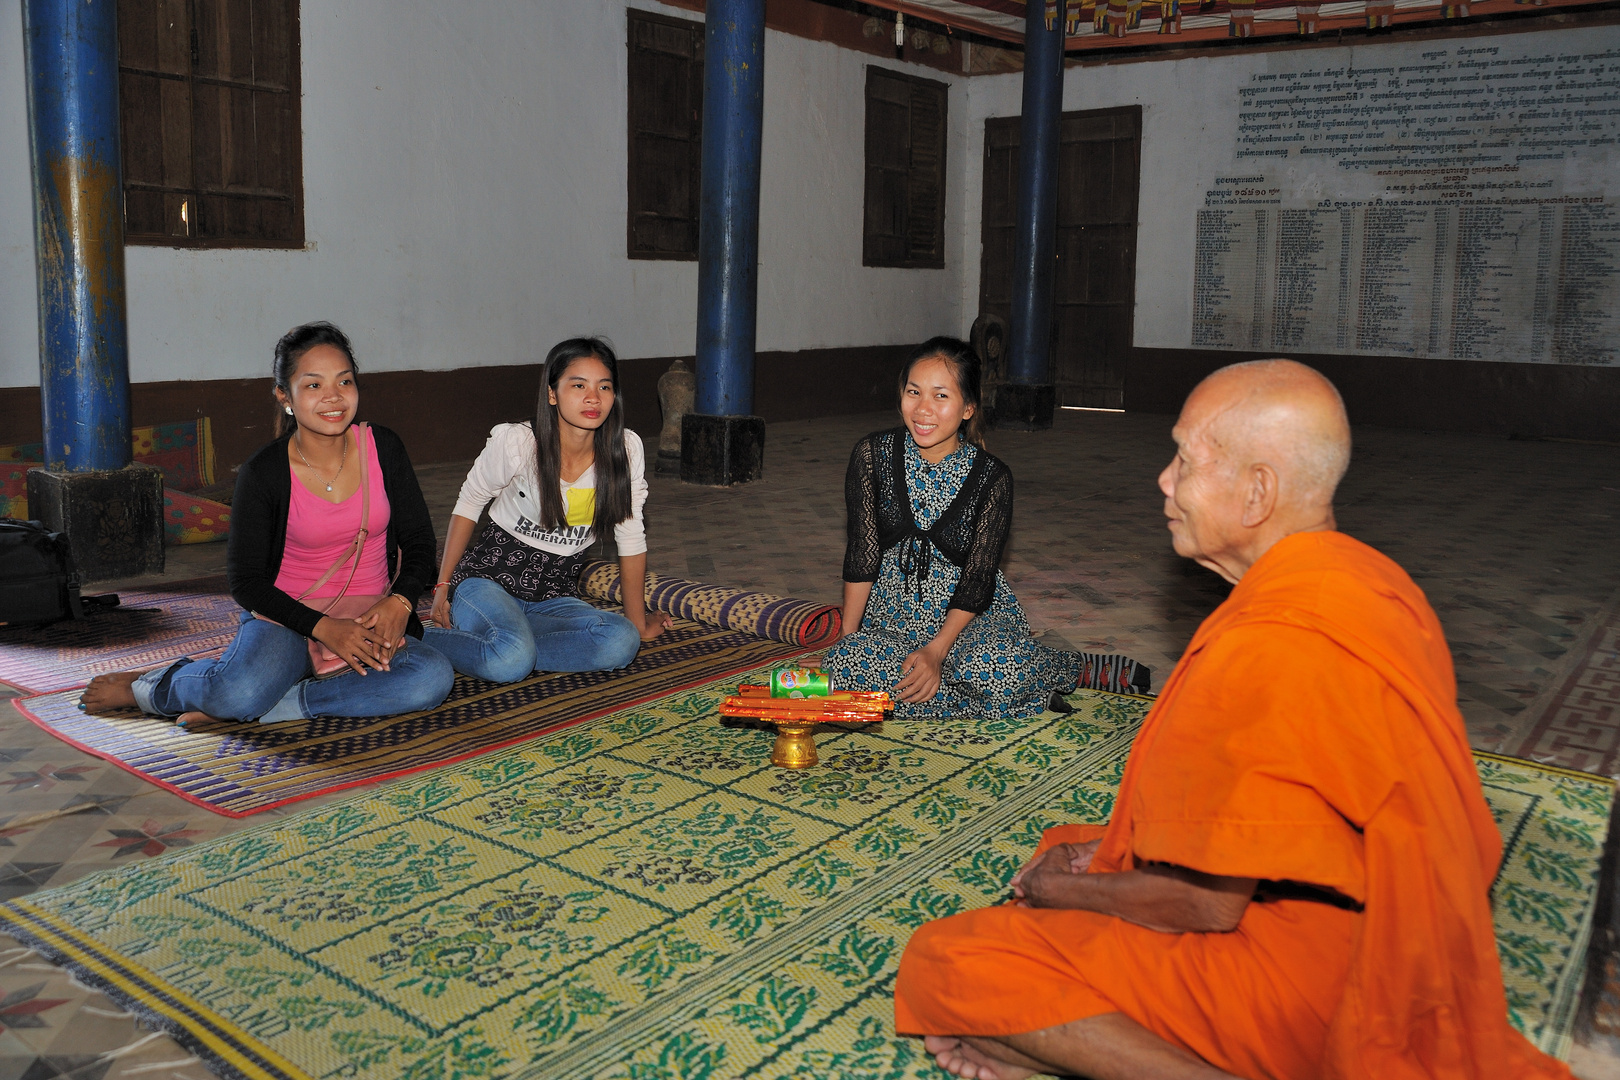 The Monk and the Girls